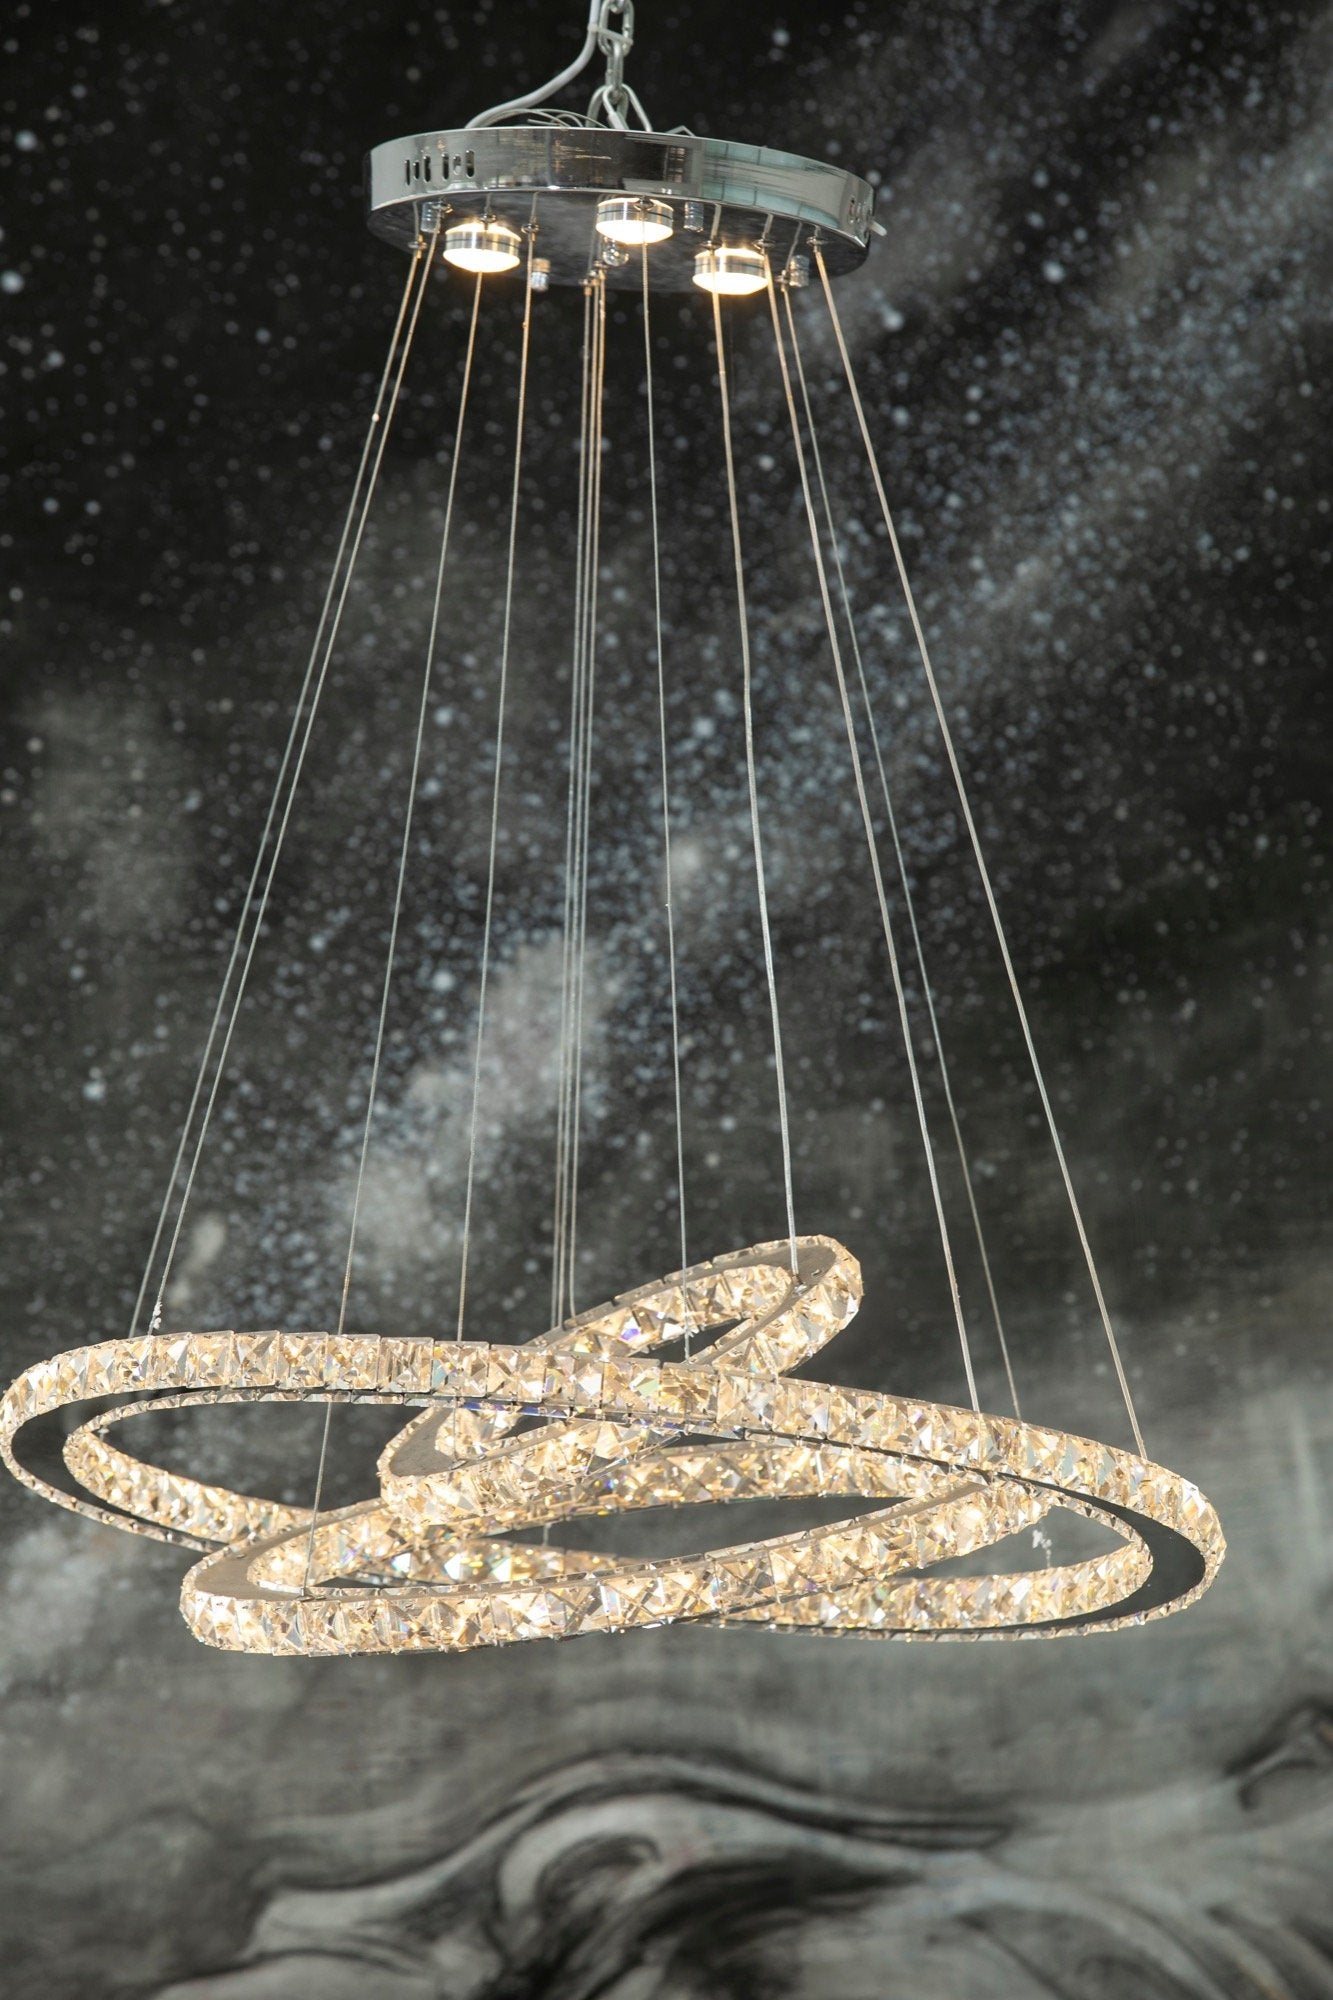 3 ring crystal chandelier with adjustable height and angle.